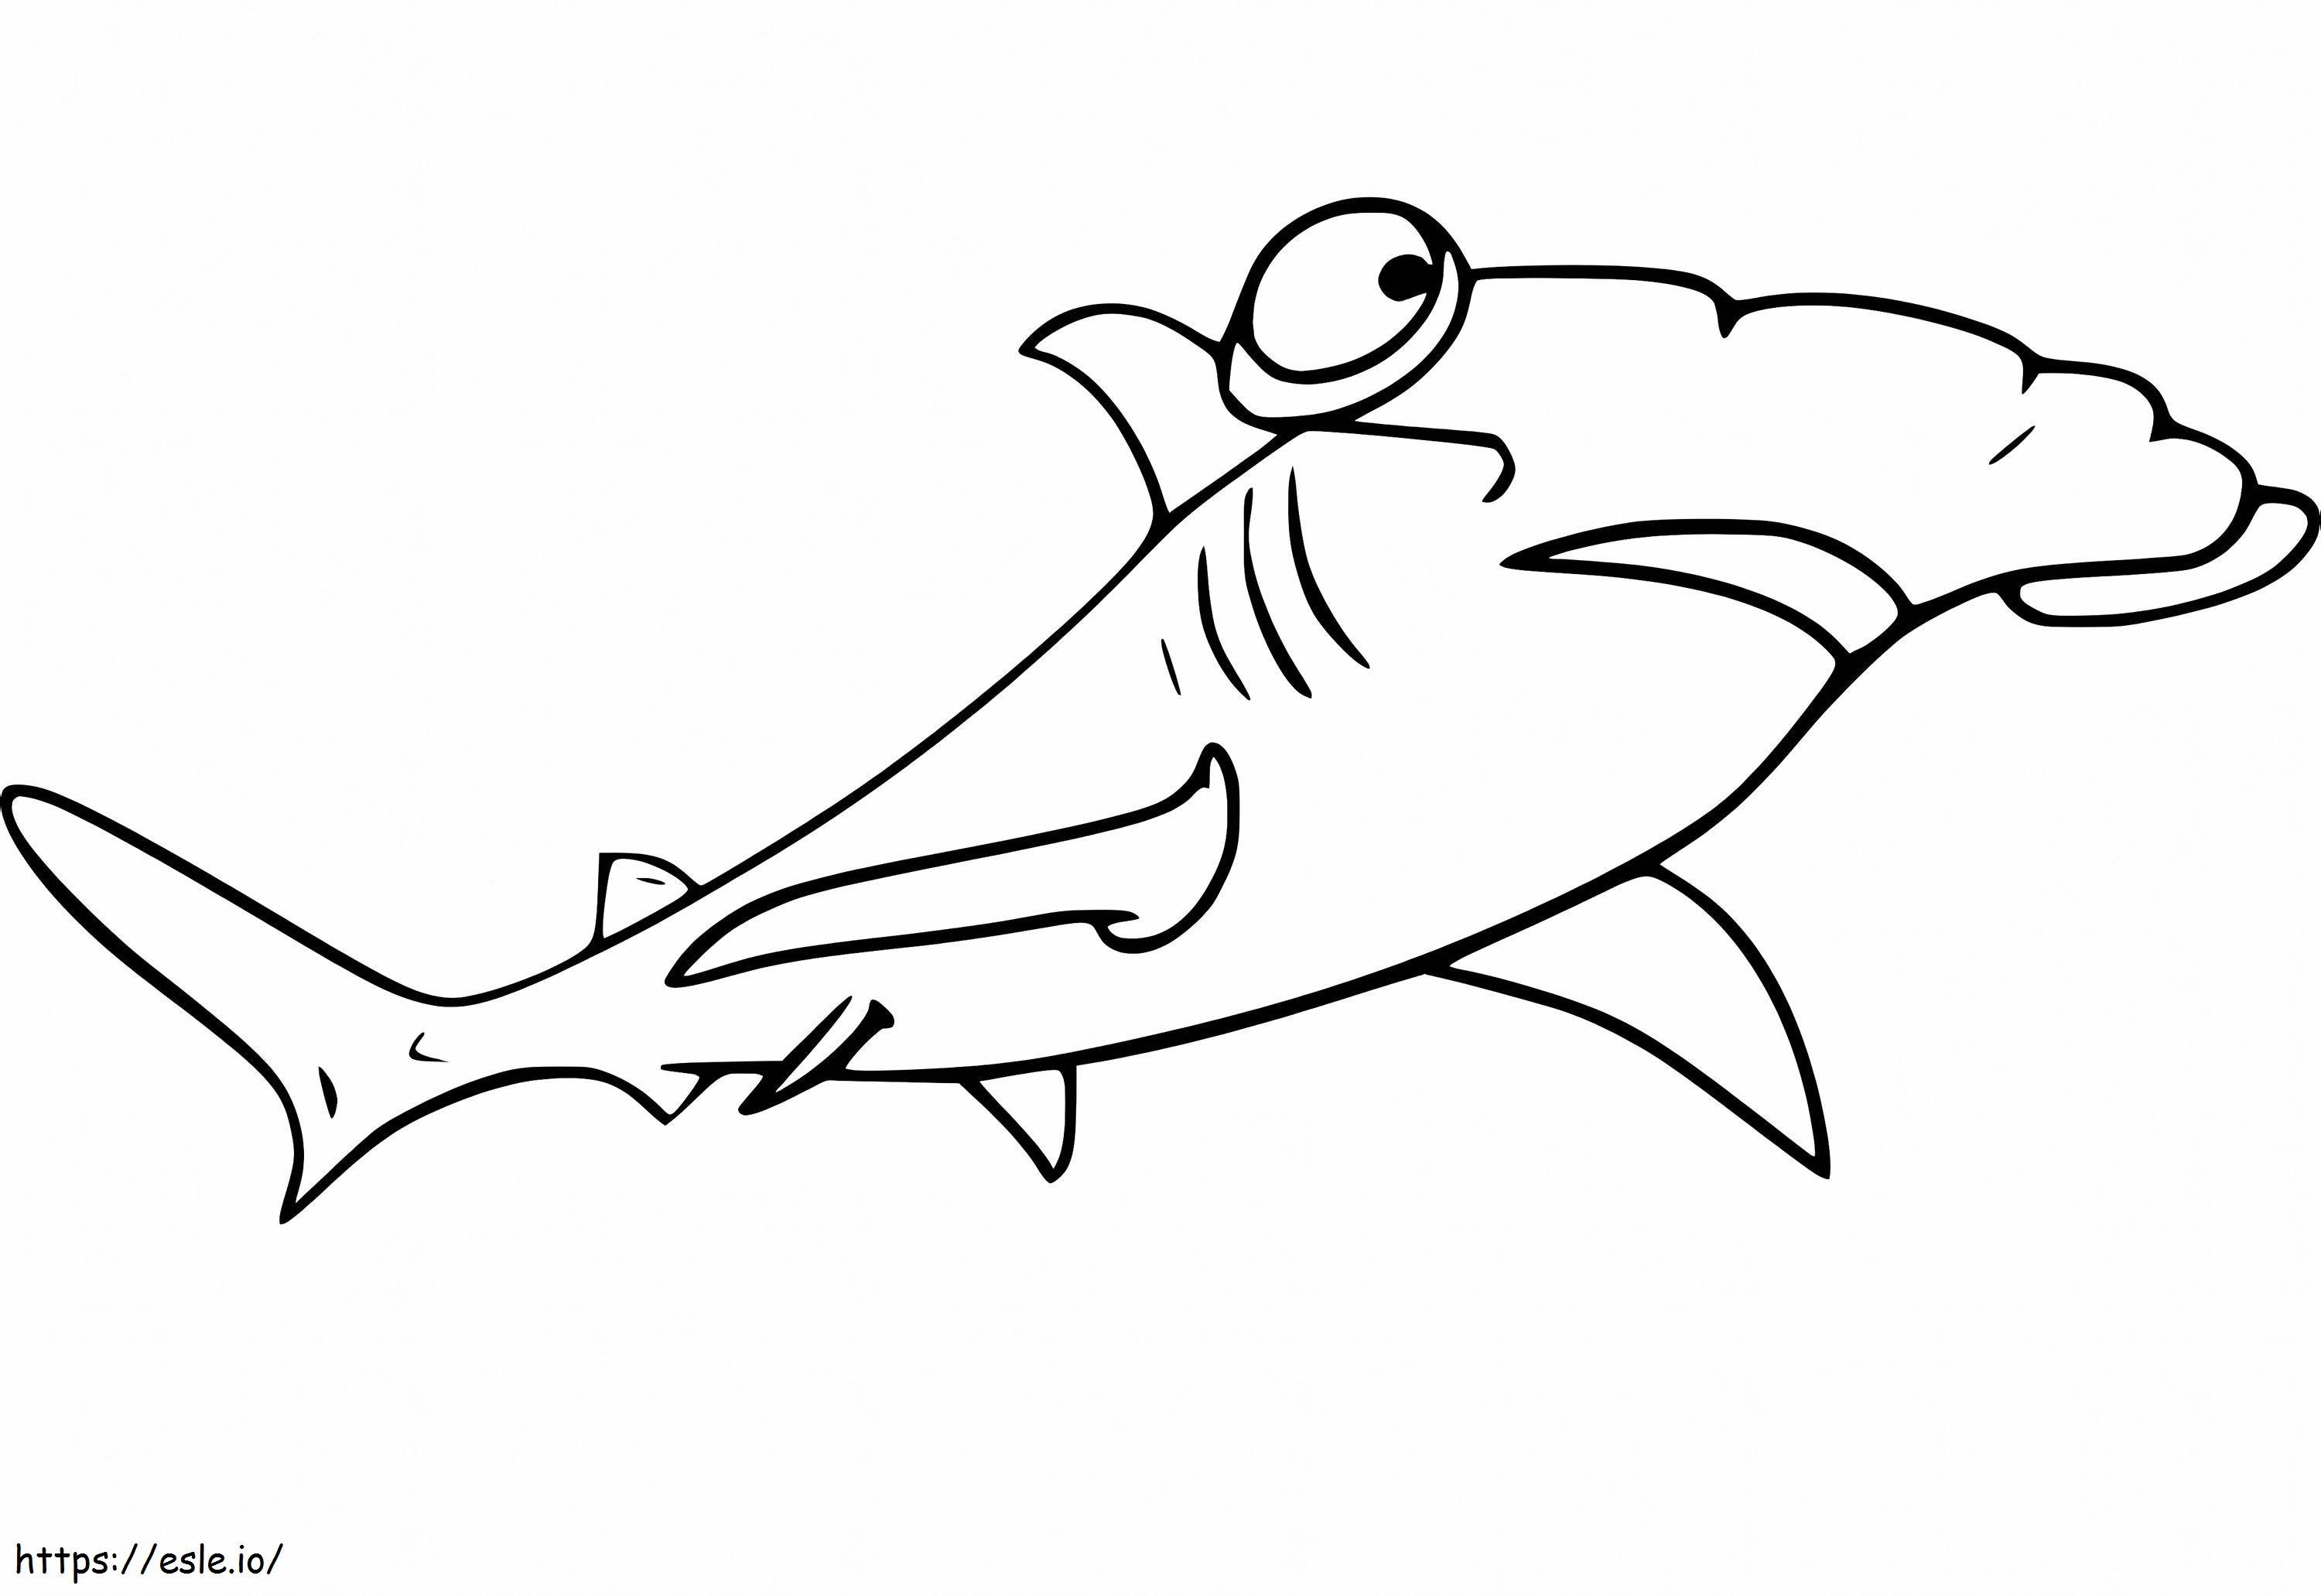 Hammerhead Shark 2 coloring page